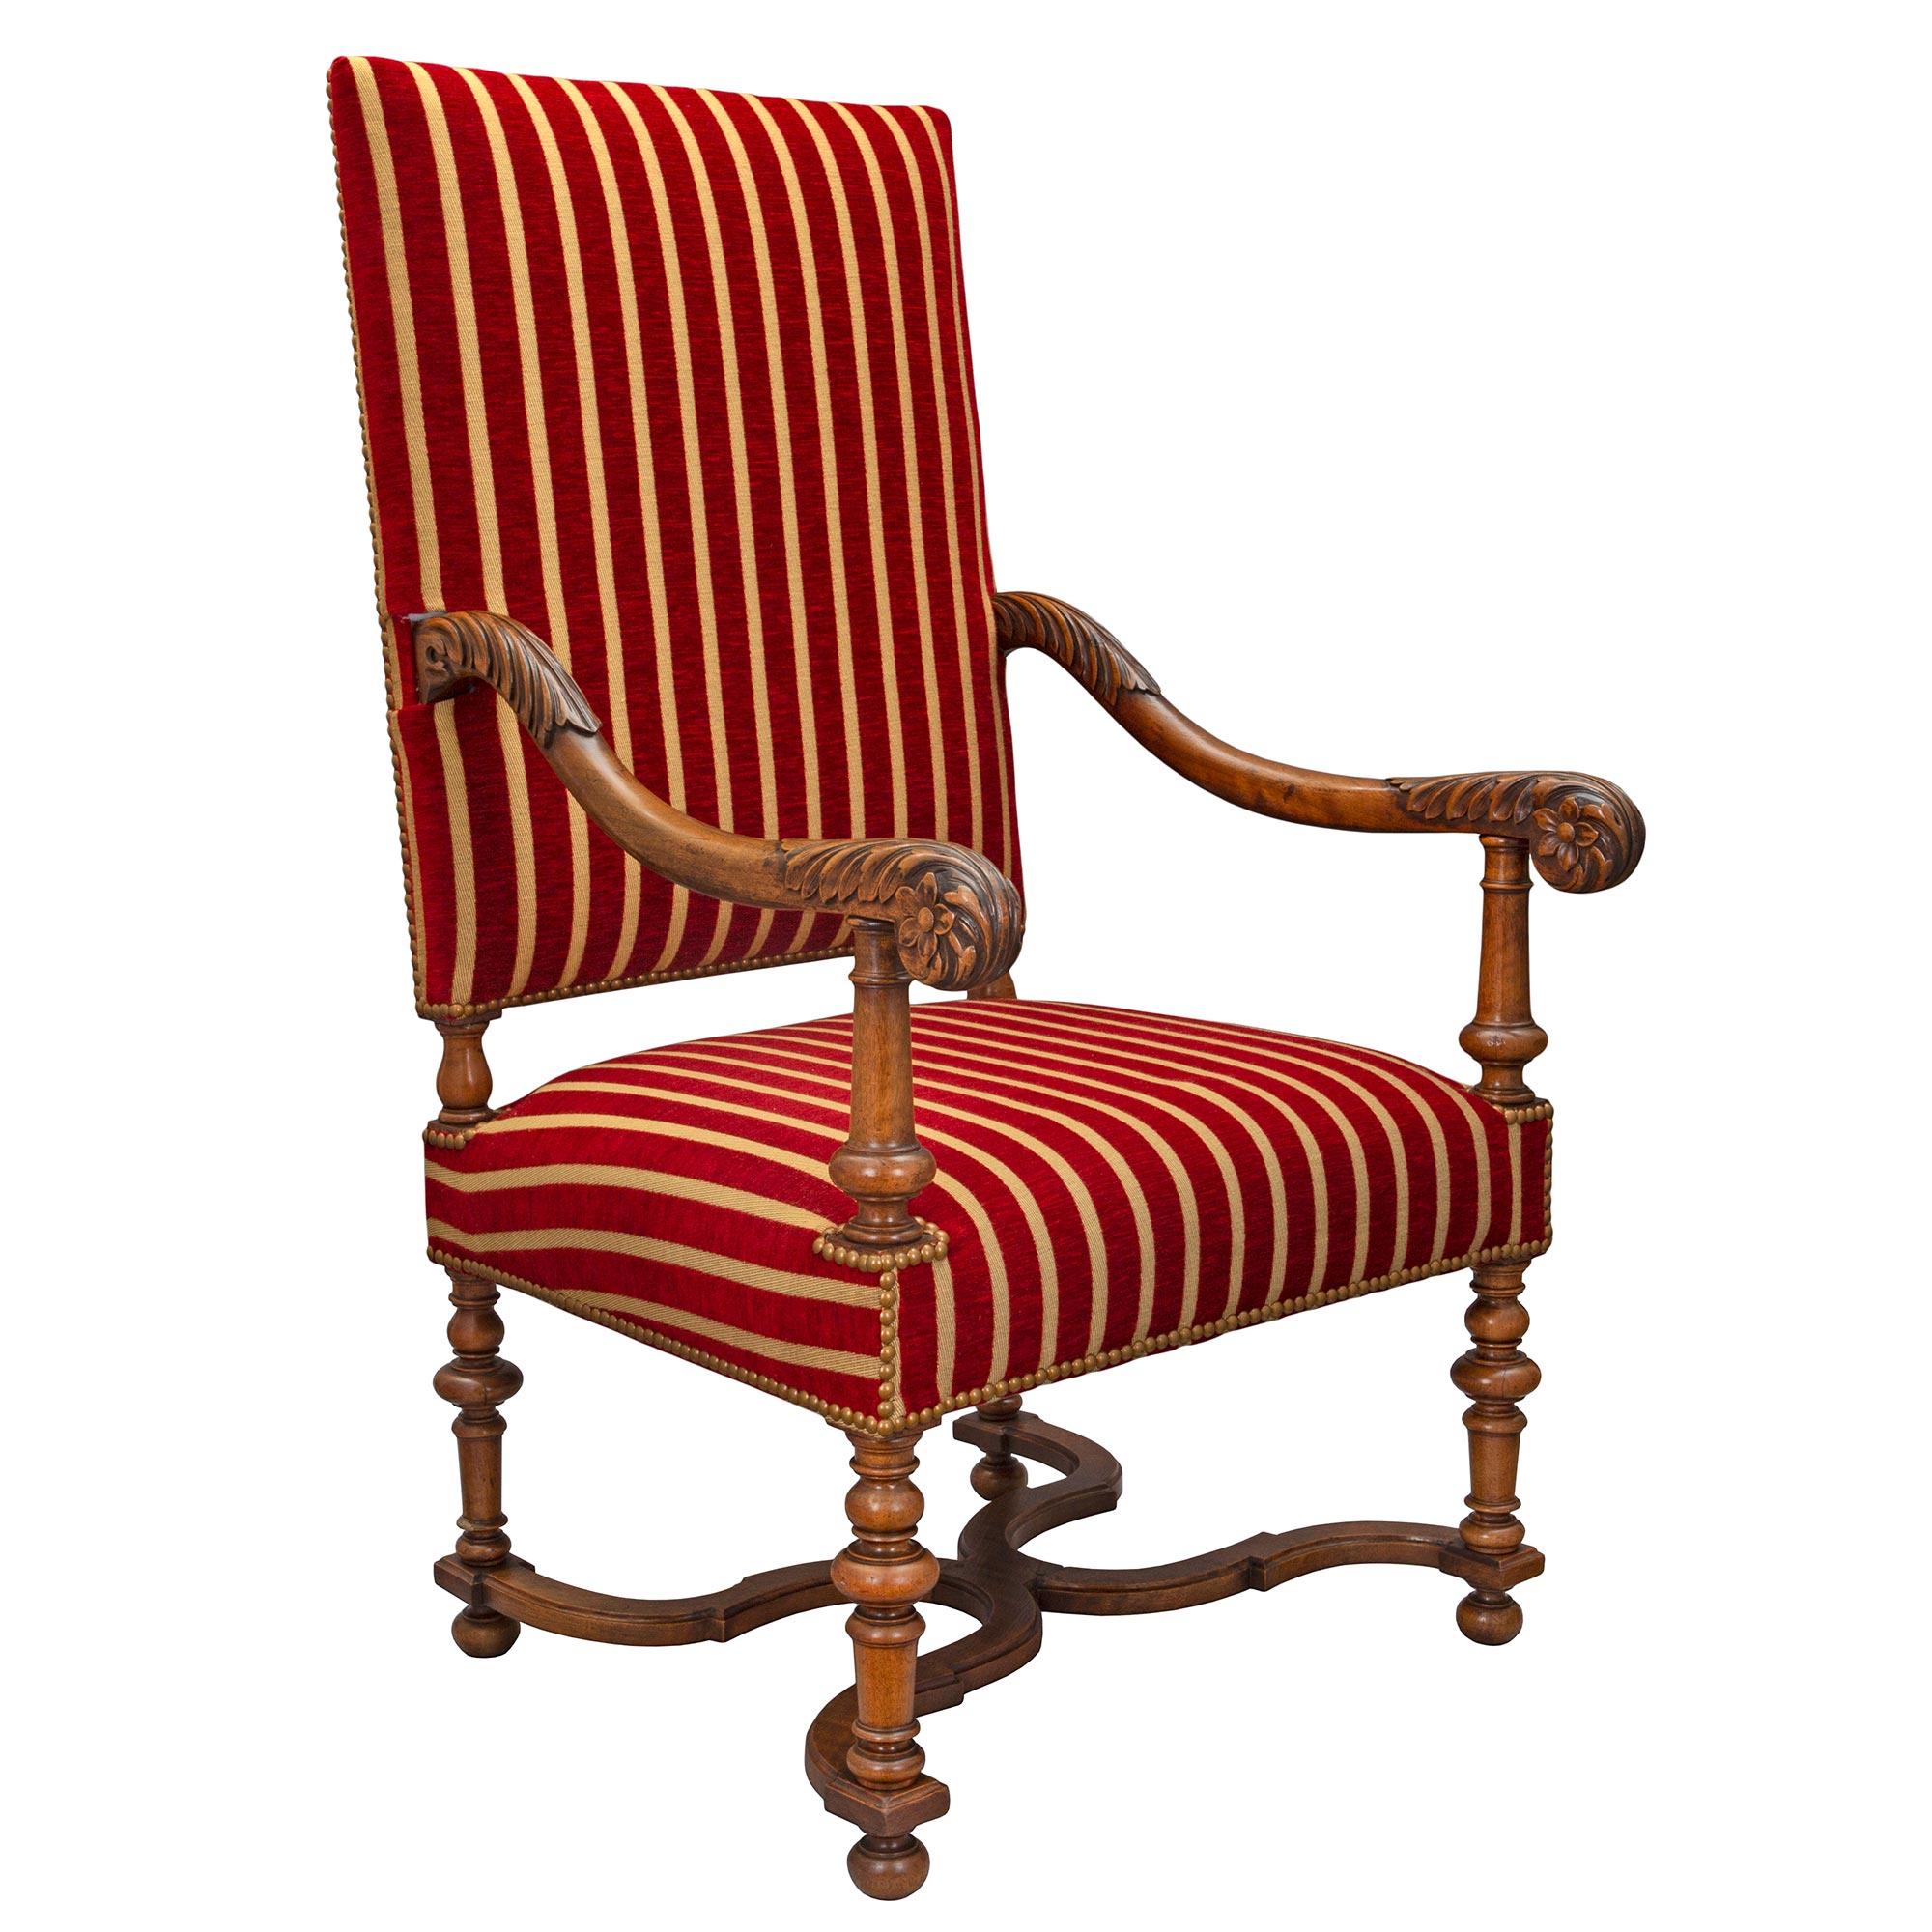 A handsome set of four French mid 19th century Louis XIII st. carved oak armchairs, signed Gillette, circa. 1840 . Each armchair is raised by turned legs joined by a curved X stretcher. The scrolled arms are richly detailed with carvings of acanthus